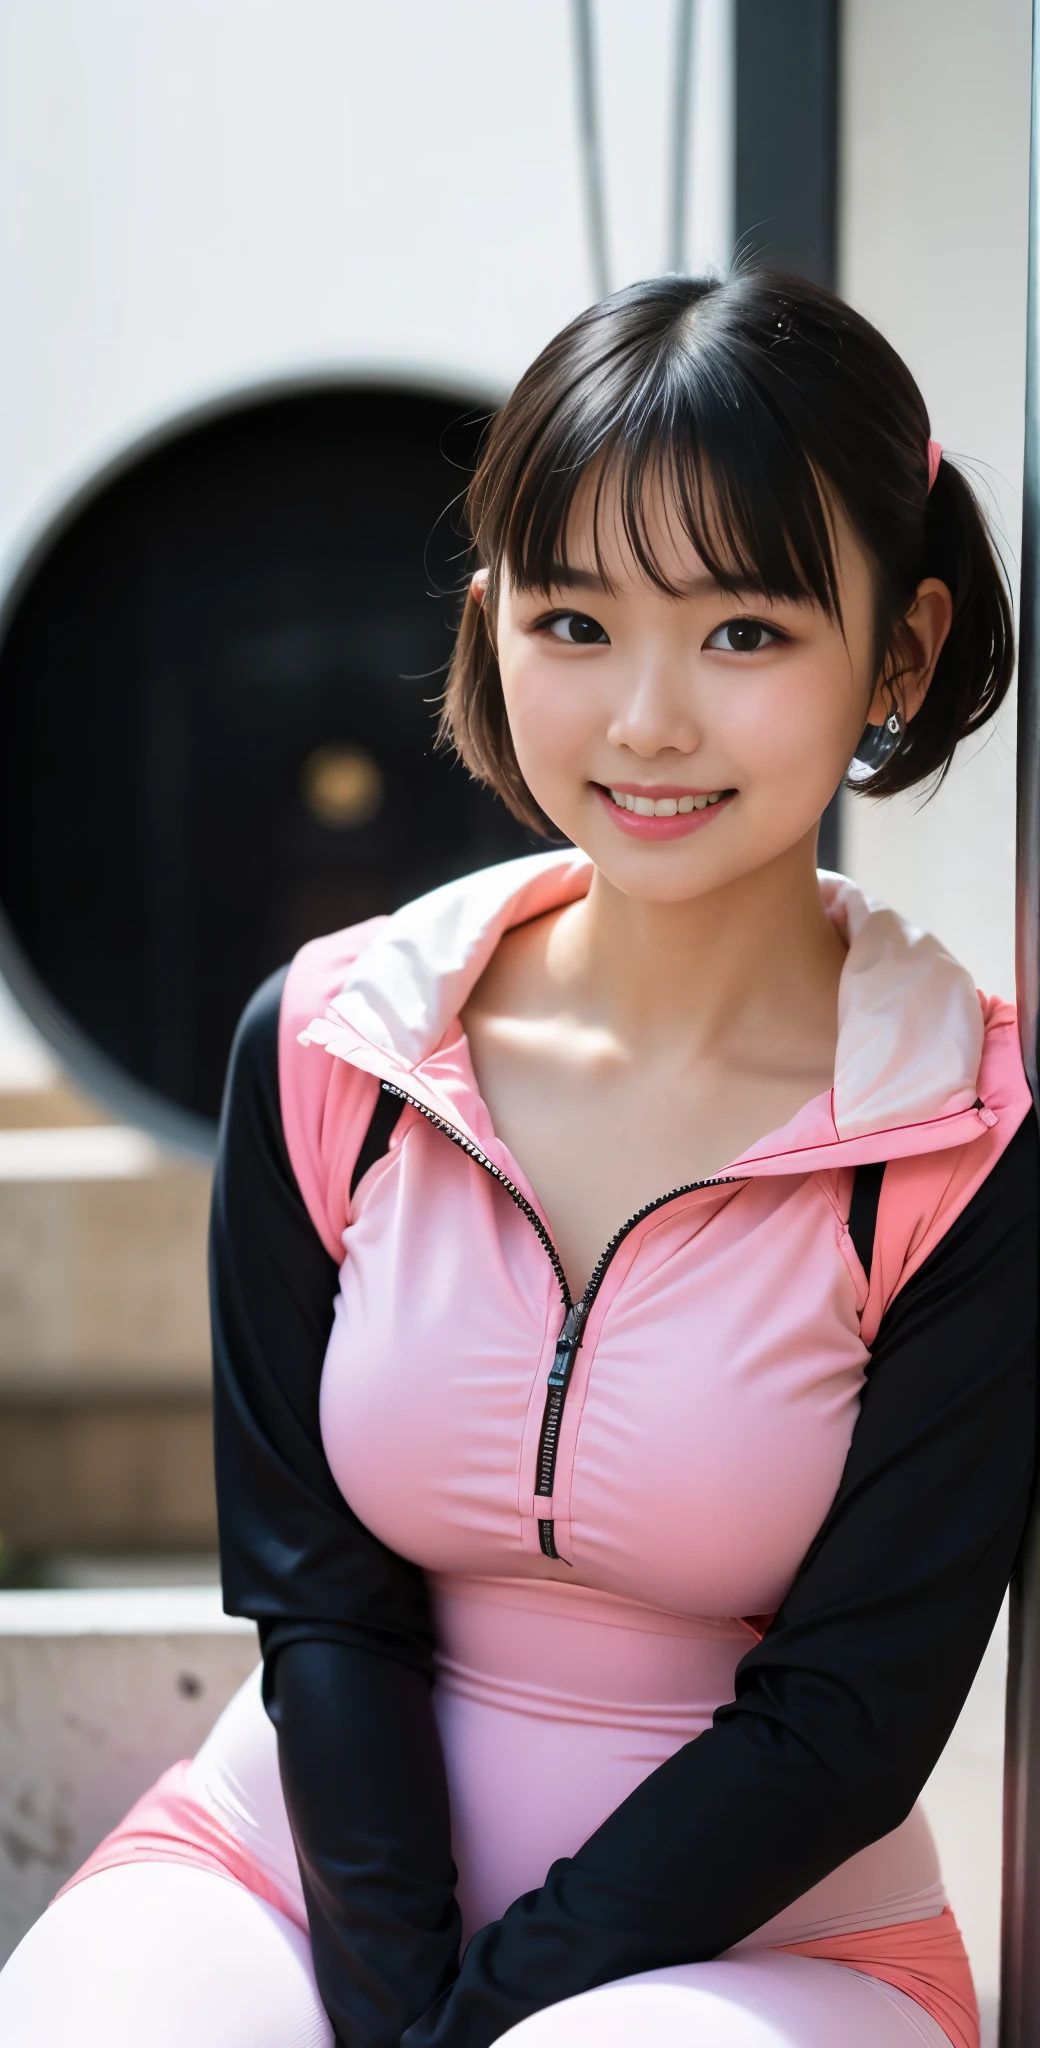 （8k、Raw photography、highest quality、masterpiece：1.2),(black haired、very short hair:1.8),(short twin tails:1.4)、show viewer,Looking at the front,erotic,white skin,(Wearing a bright pink plug suit:1.7)、()、(Clothing that emphasizes the shape of your chest、publish one&#39;Skin:1.6)、(big breasts :1.4)、slim body shape、ultra high resolution,beautiful,beautiful fece,(alone, no background:1.9),whole bodyボディー,japanese woman,（Photoreal：1.37）、photon mapping,reality、(Baby-faced and cute: 1.2)、(cute smile: 1.7)、(With a round face: 1.8)、radio city、Physically based rendering、depth of field rally background、photograph, (I can see your knees,close up of thighs:1.5),whole body、super fine